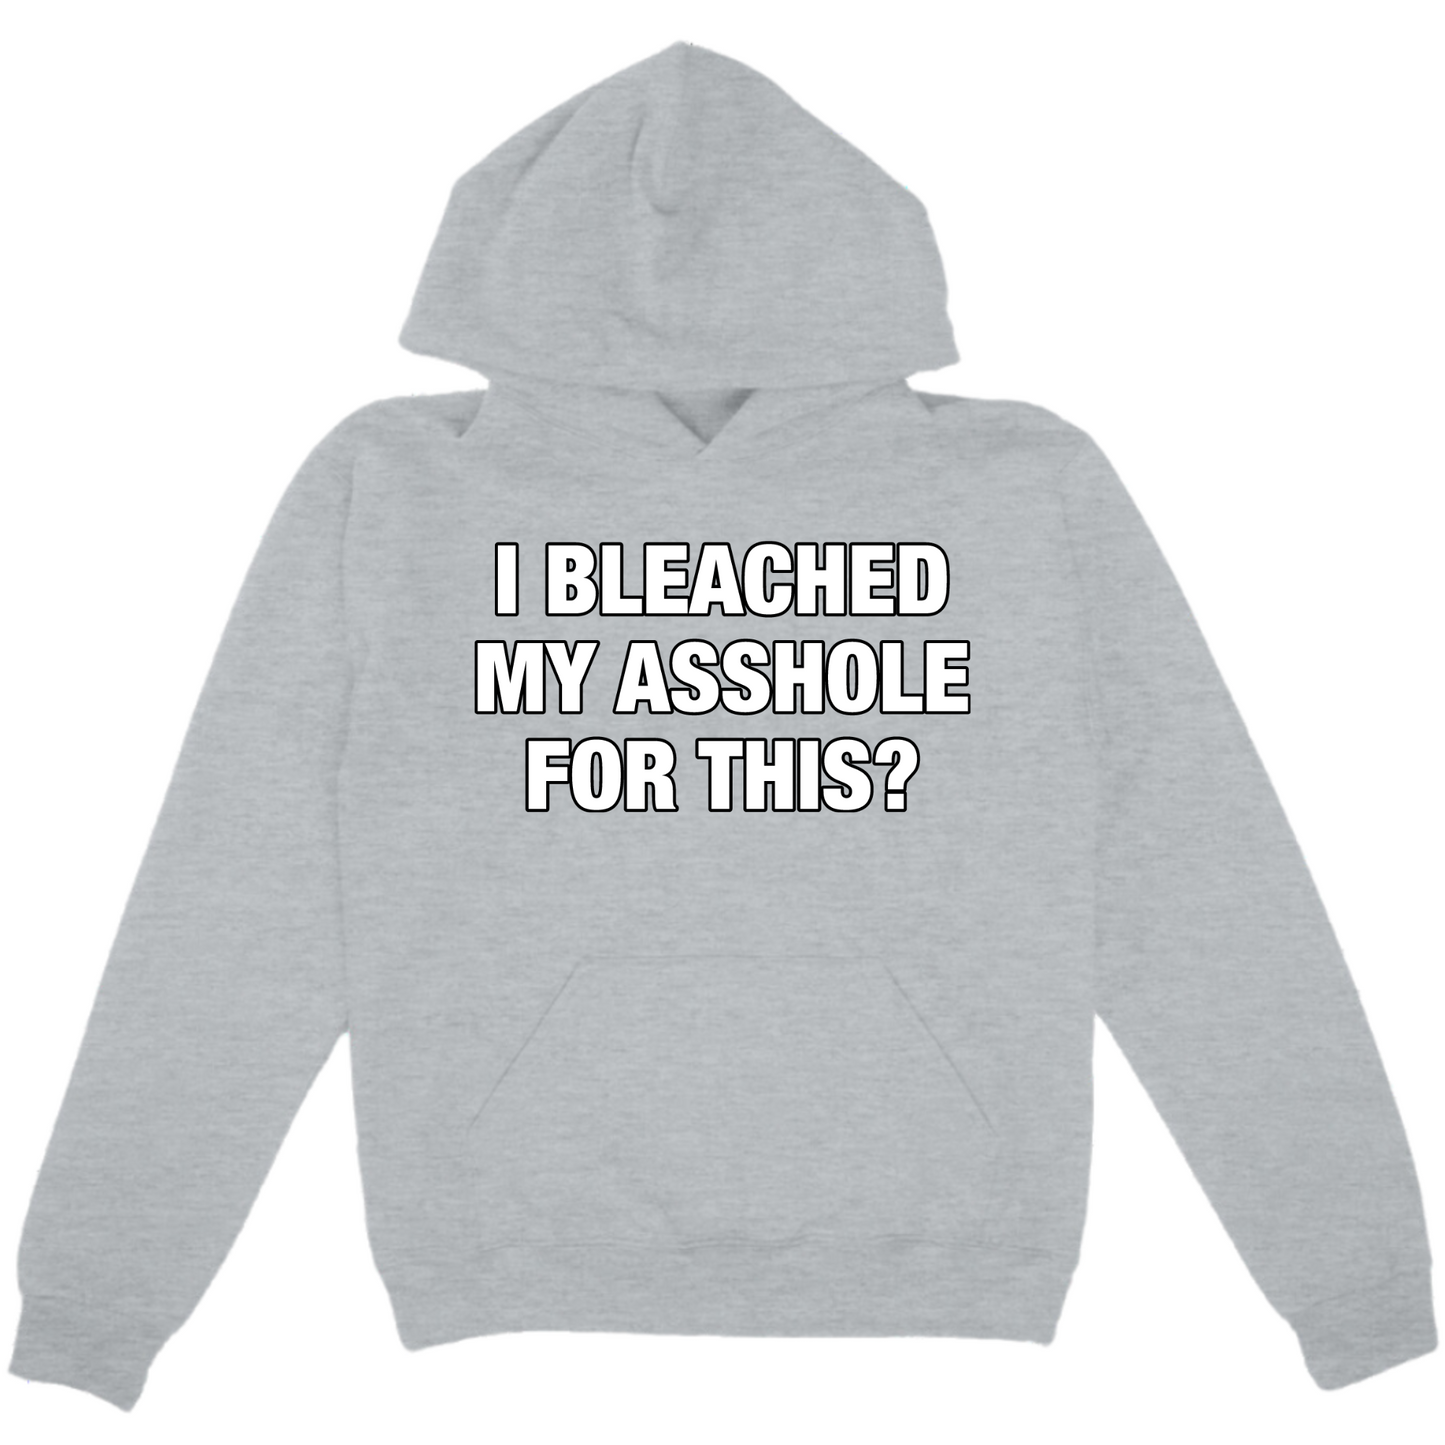 I Bleached My Asshole For This? Hoodie